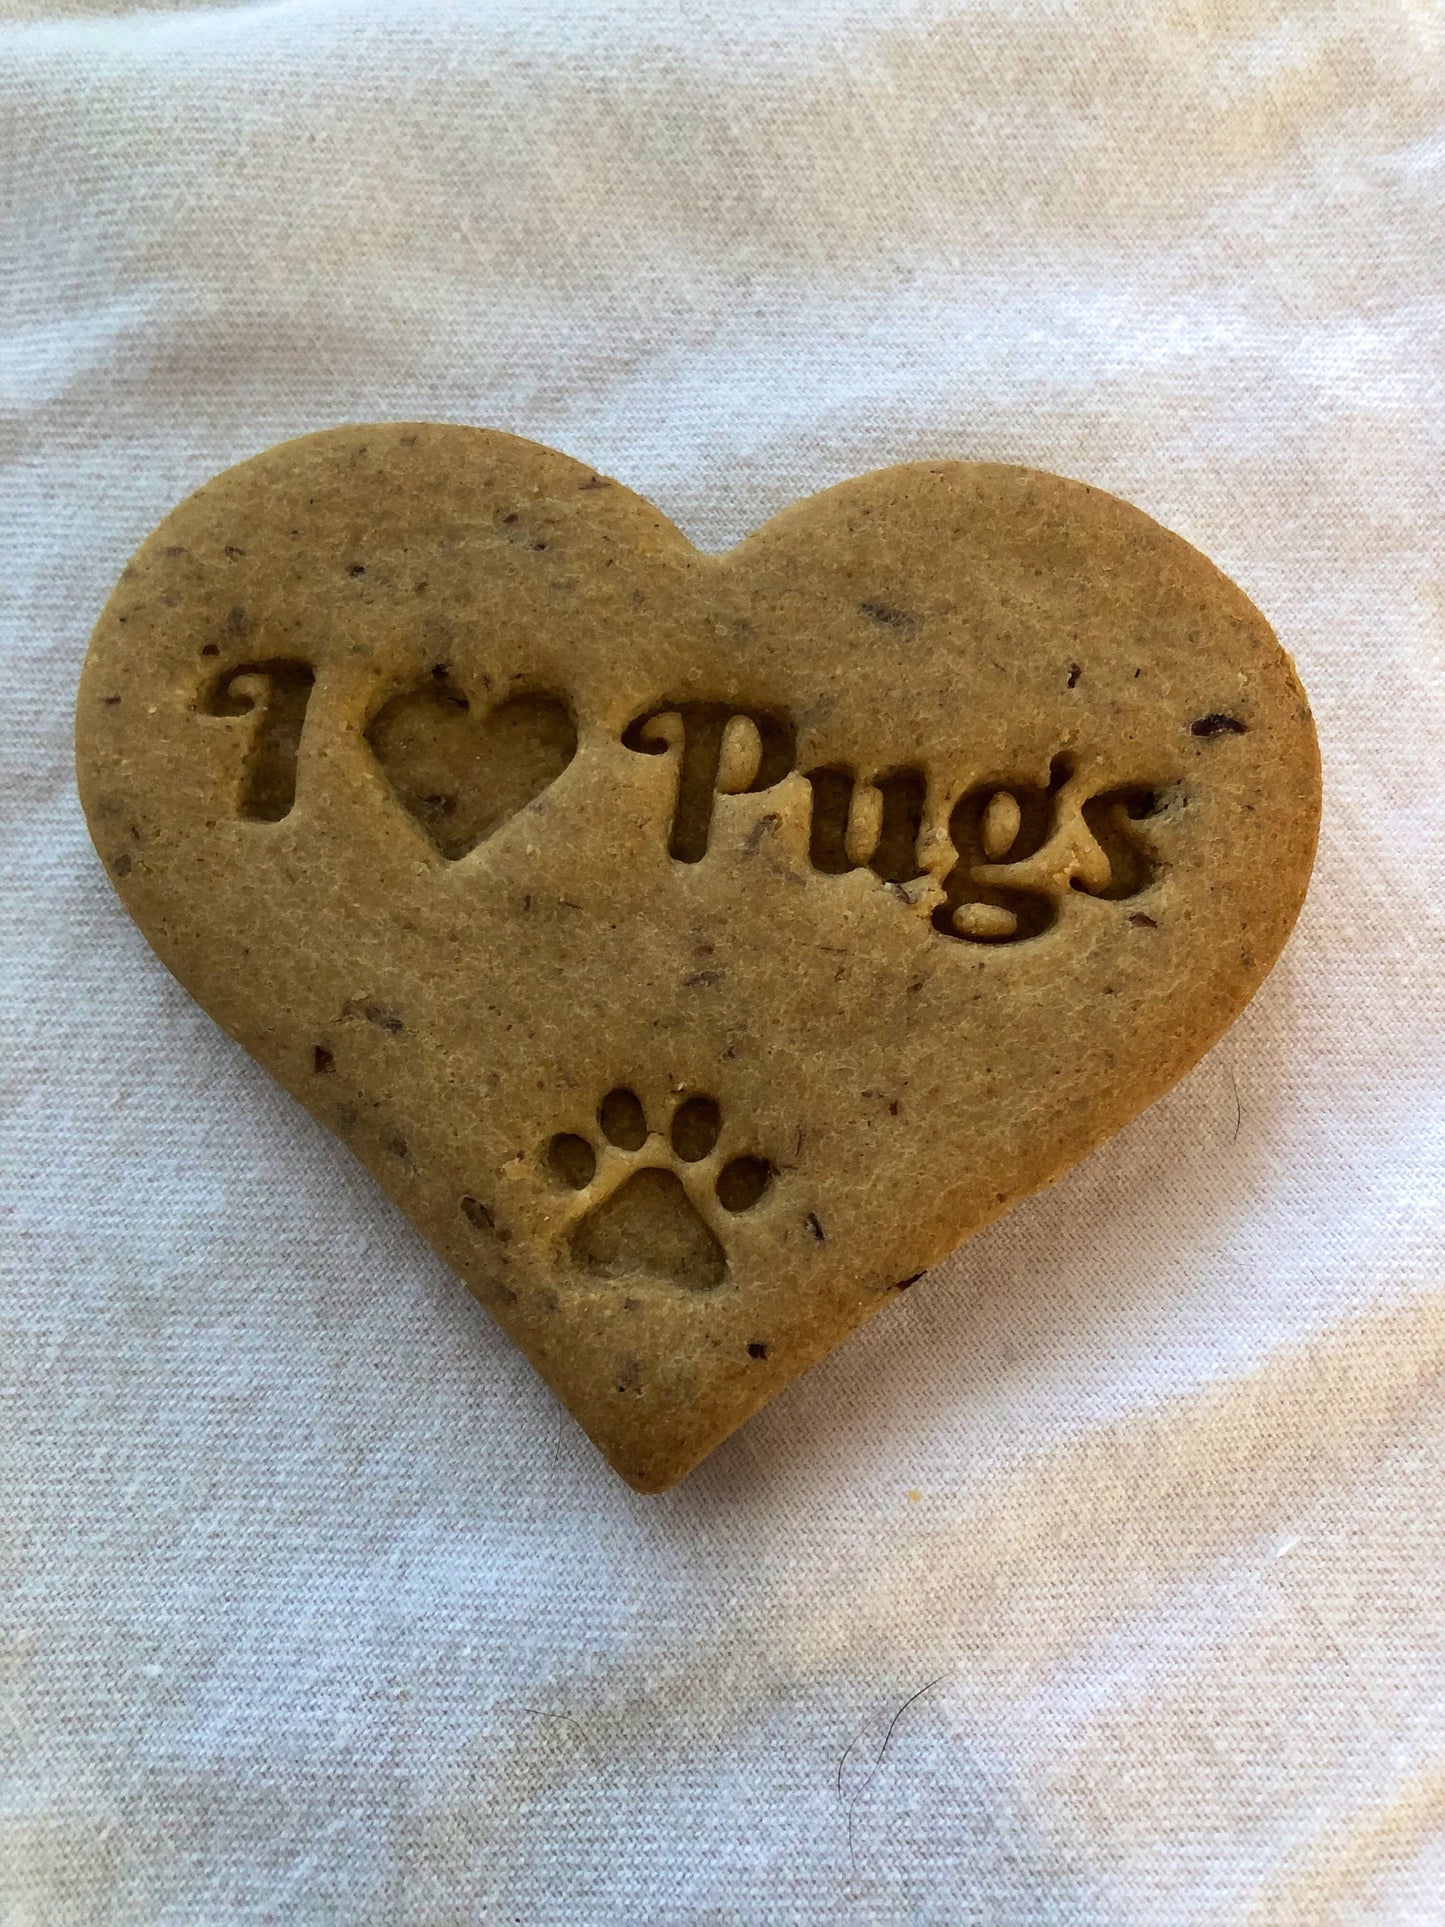 Dog Cookies PB Banana Homemade Limited Ingredient Natural No Wheat, Soy or Corn - A Portion of Proceeds Go To Animal Rescue Groups